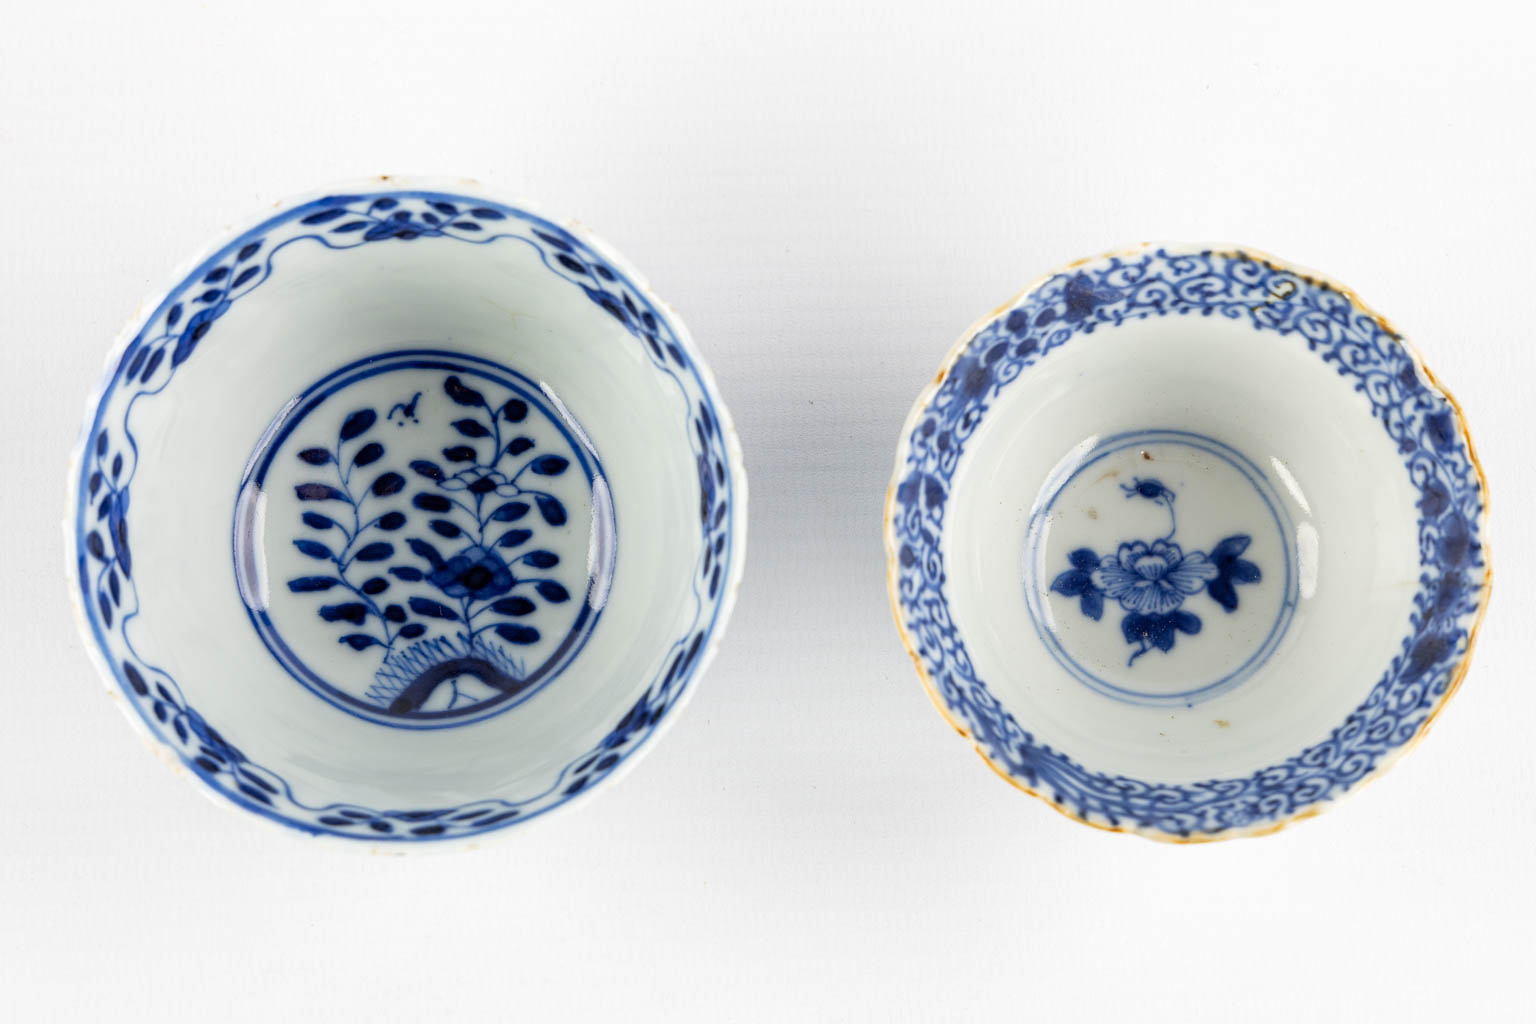 A pair of Chinese plate, blue-white decor of 'Fish and Crab', 19th C. (D:13,5 cm) - Image 6 of 9